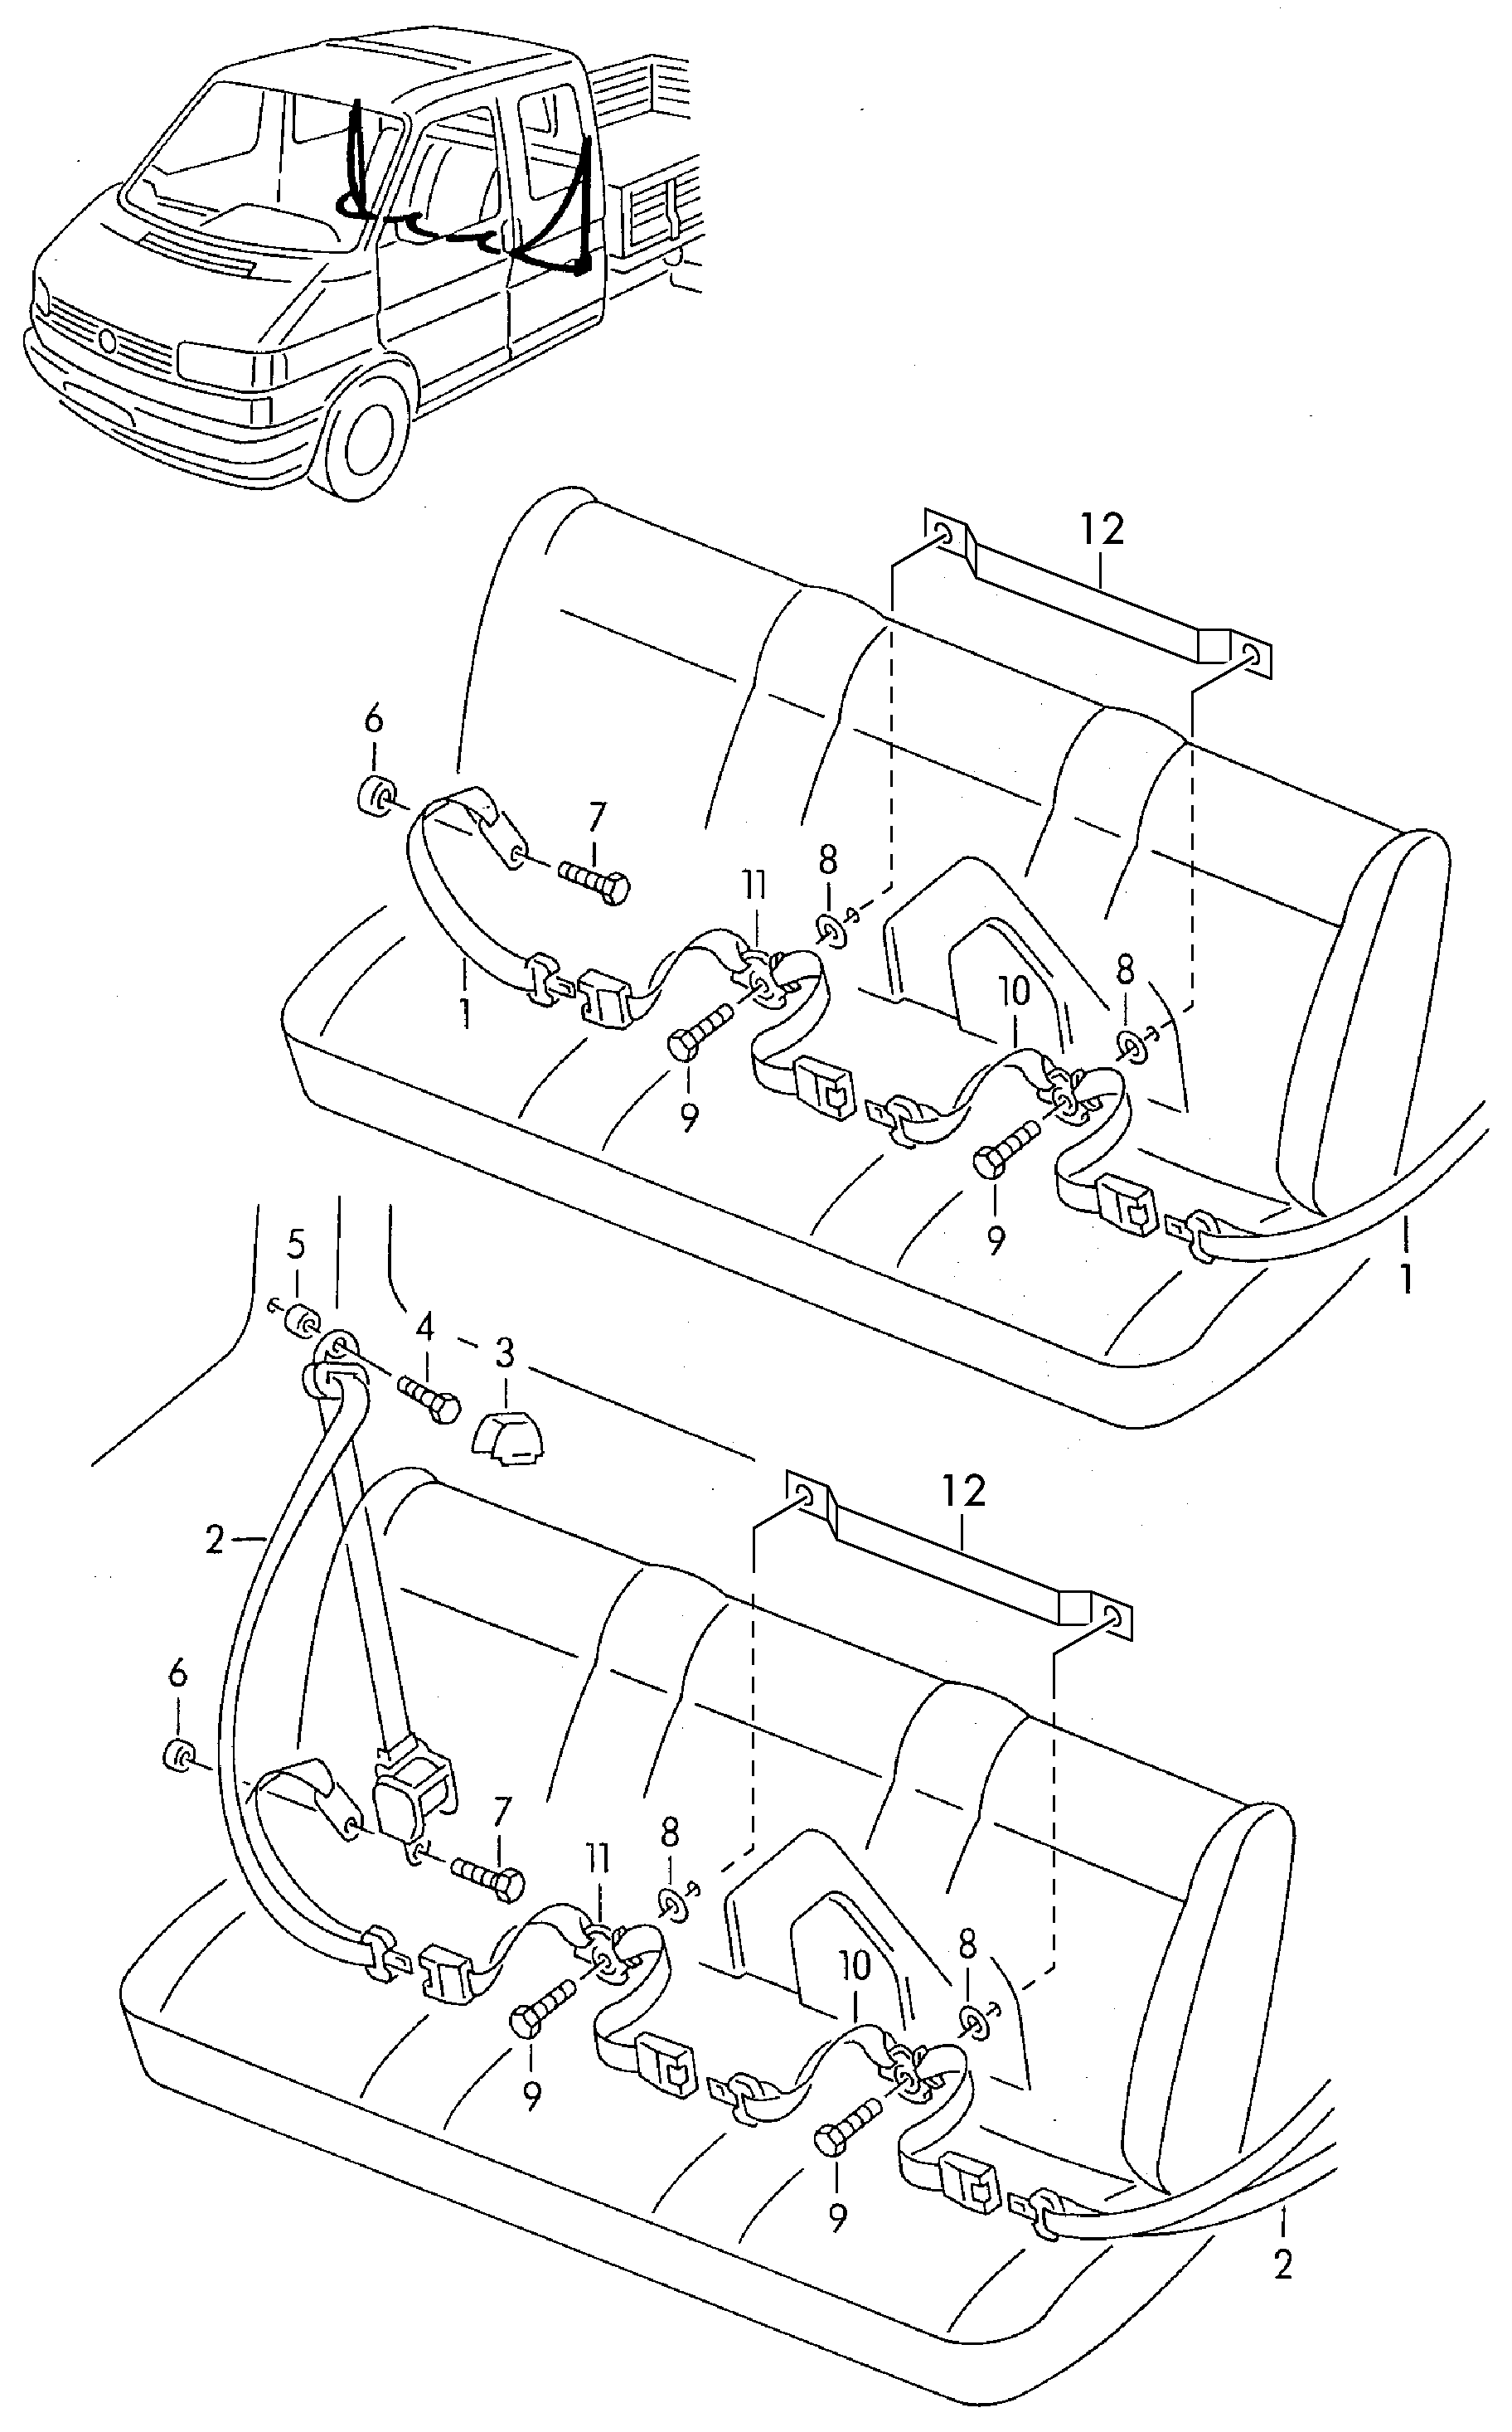 Seat belts in<br>passenger compartment  - Transporter syncro - trsy